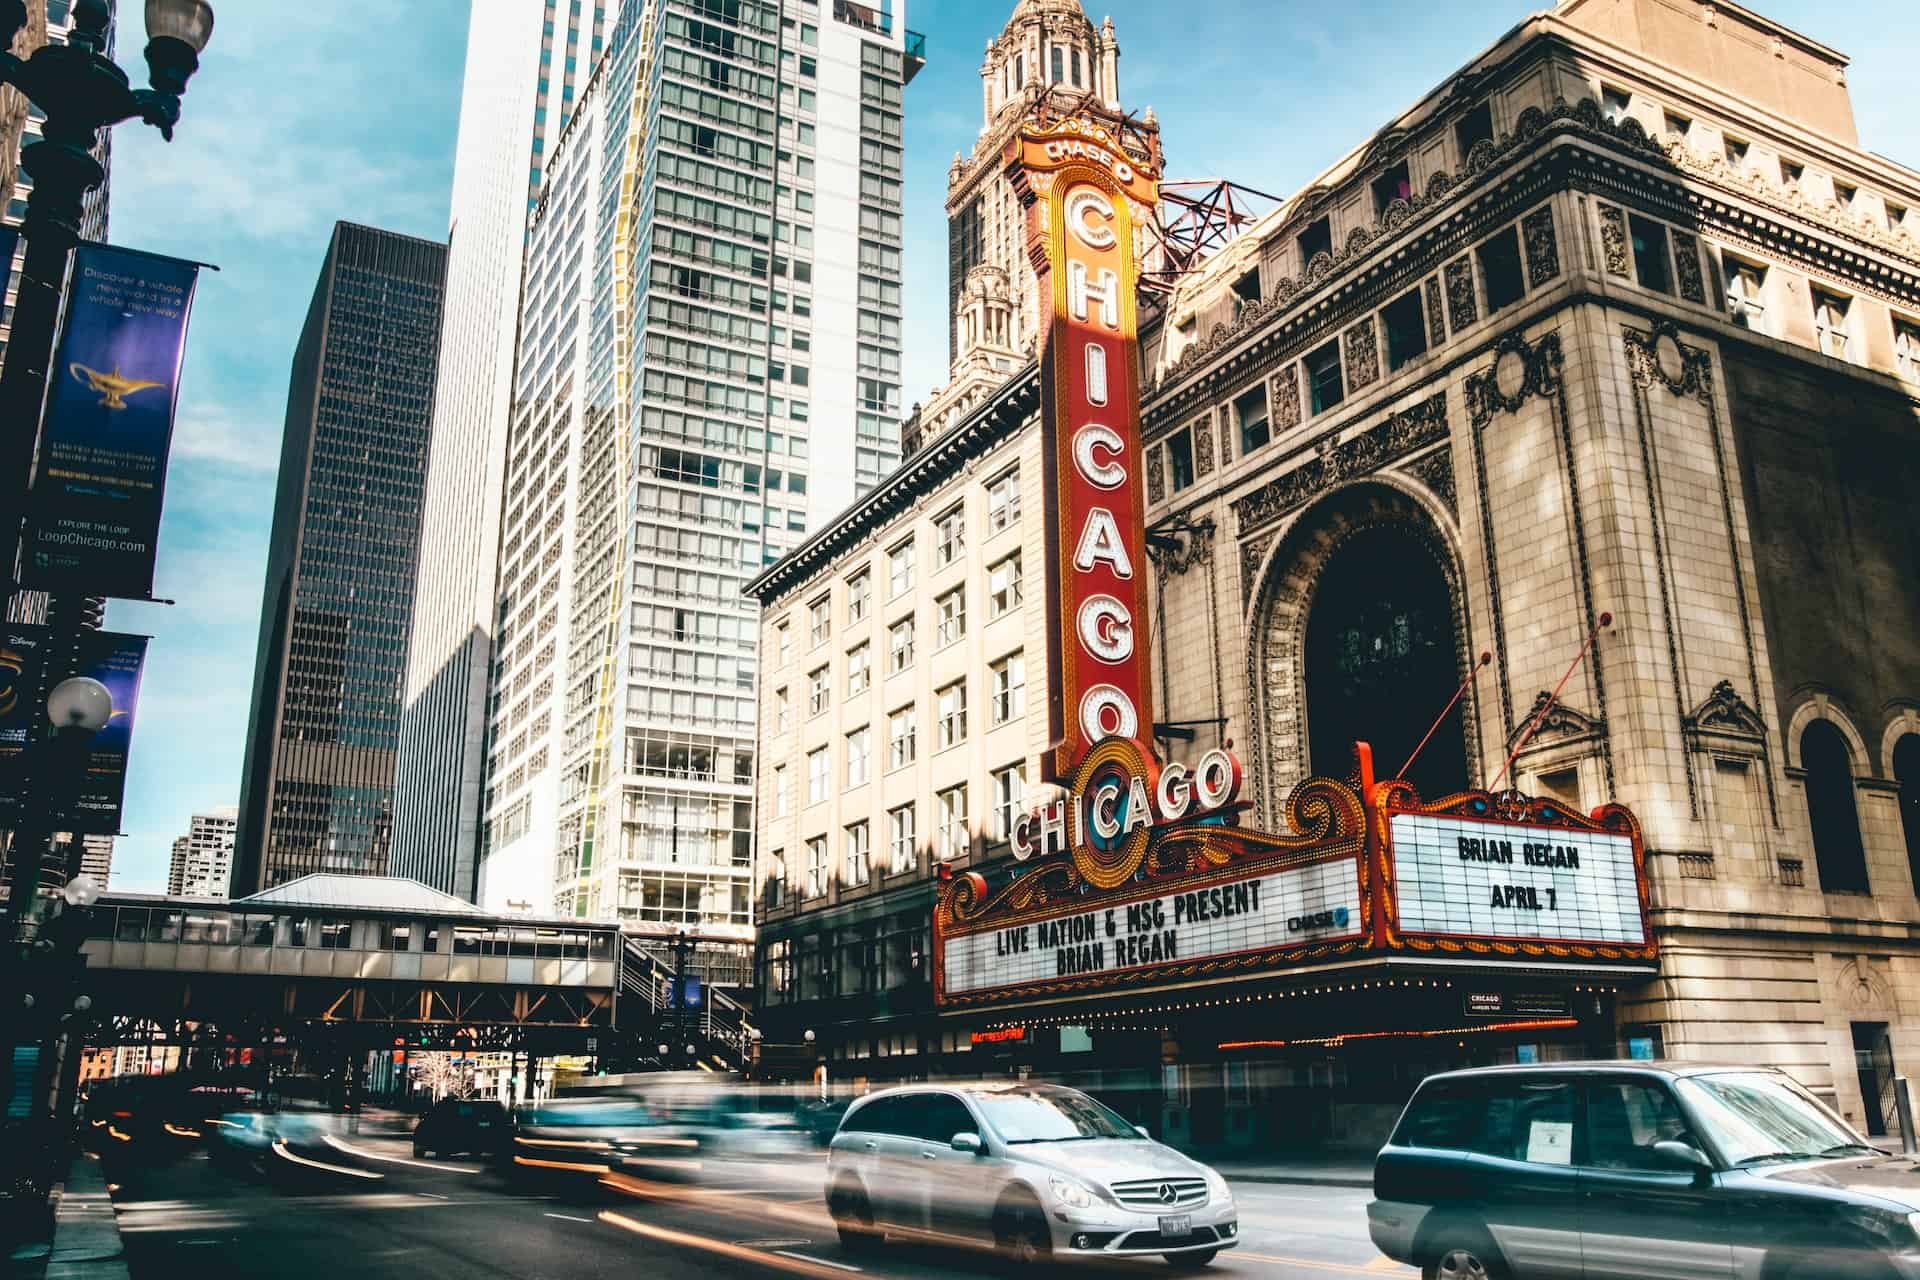 Best things to do in Chicago Illinois - Michael Sparrow - The Chicago Theatre by Sawyer Bengtson on Unsplash